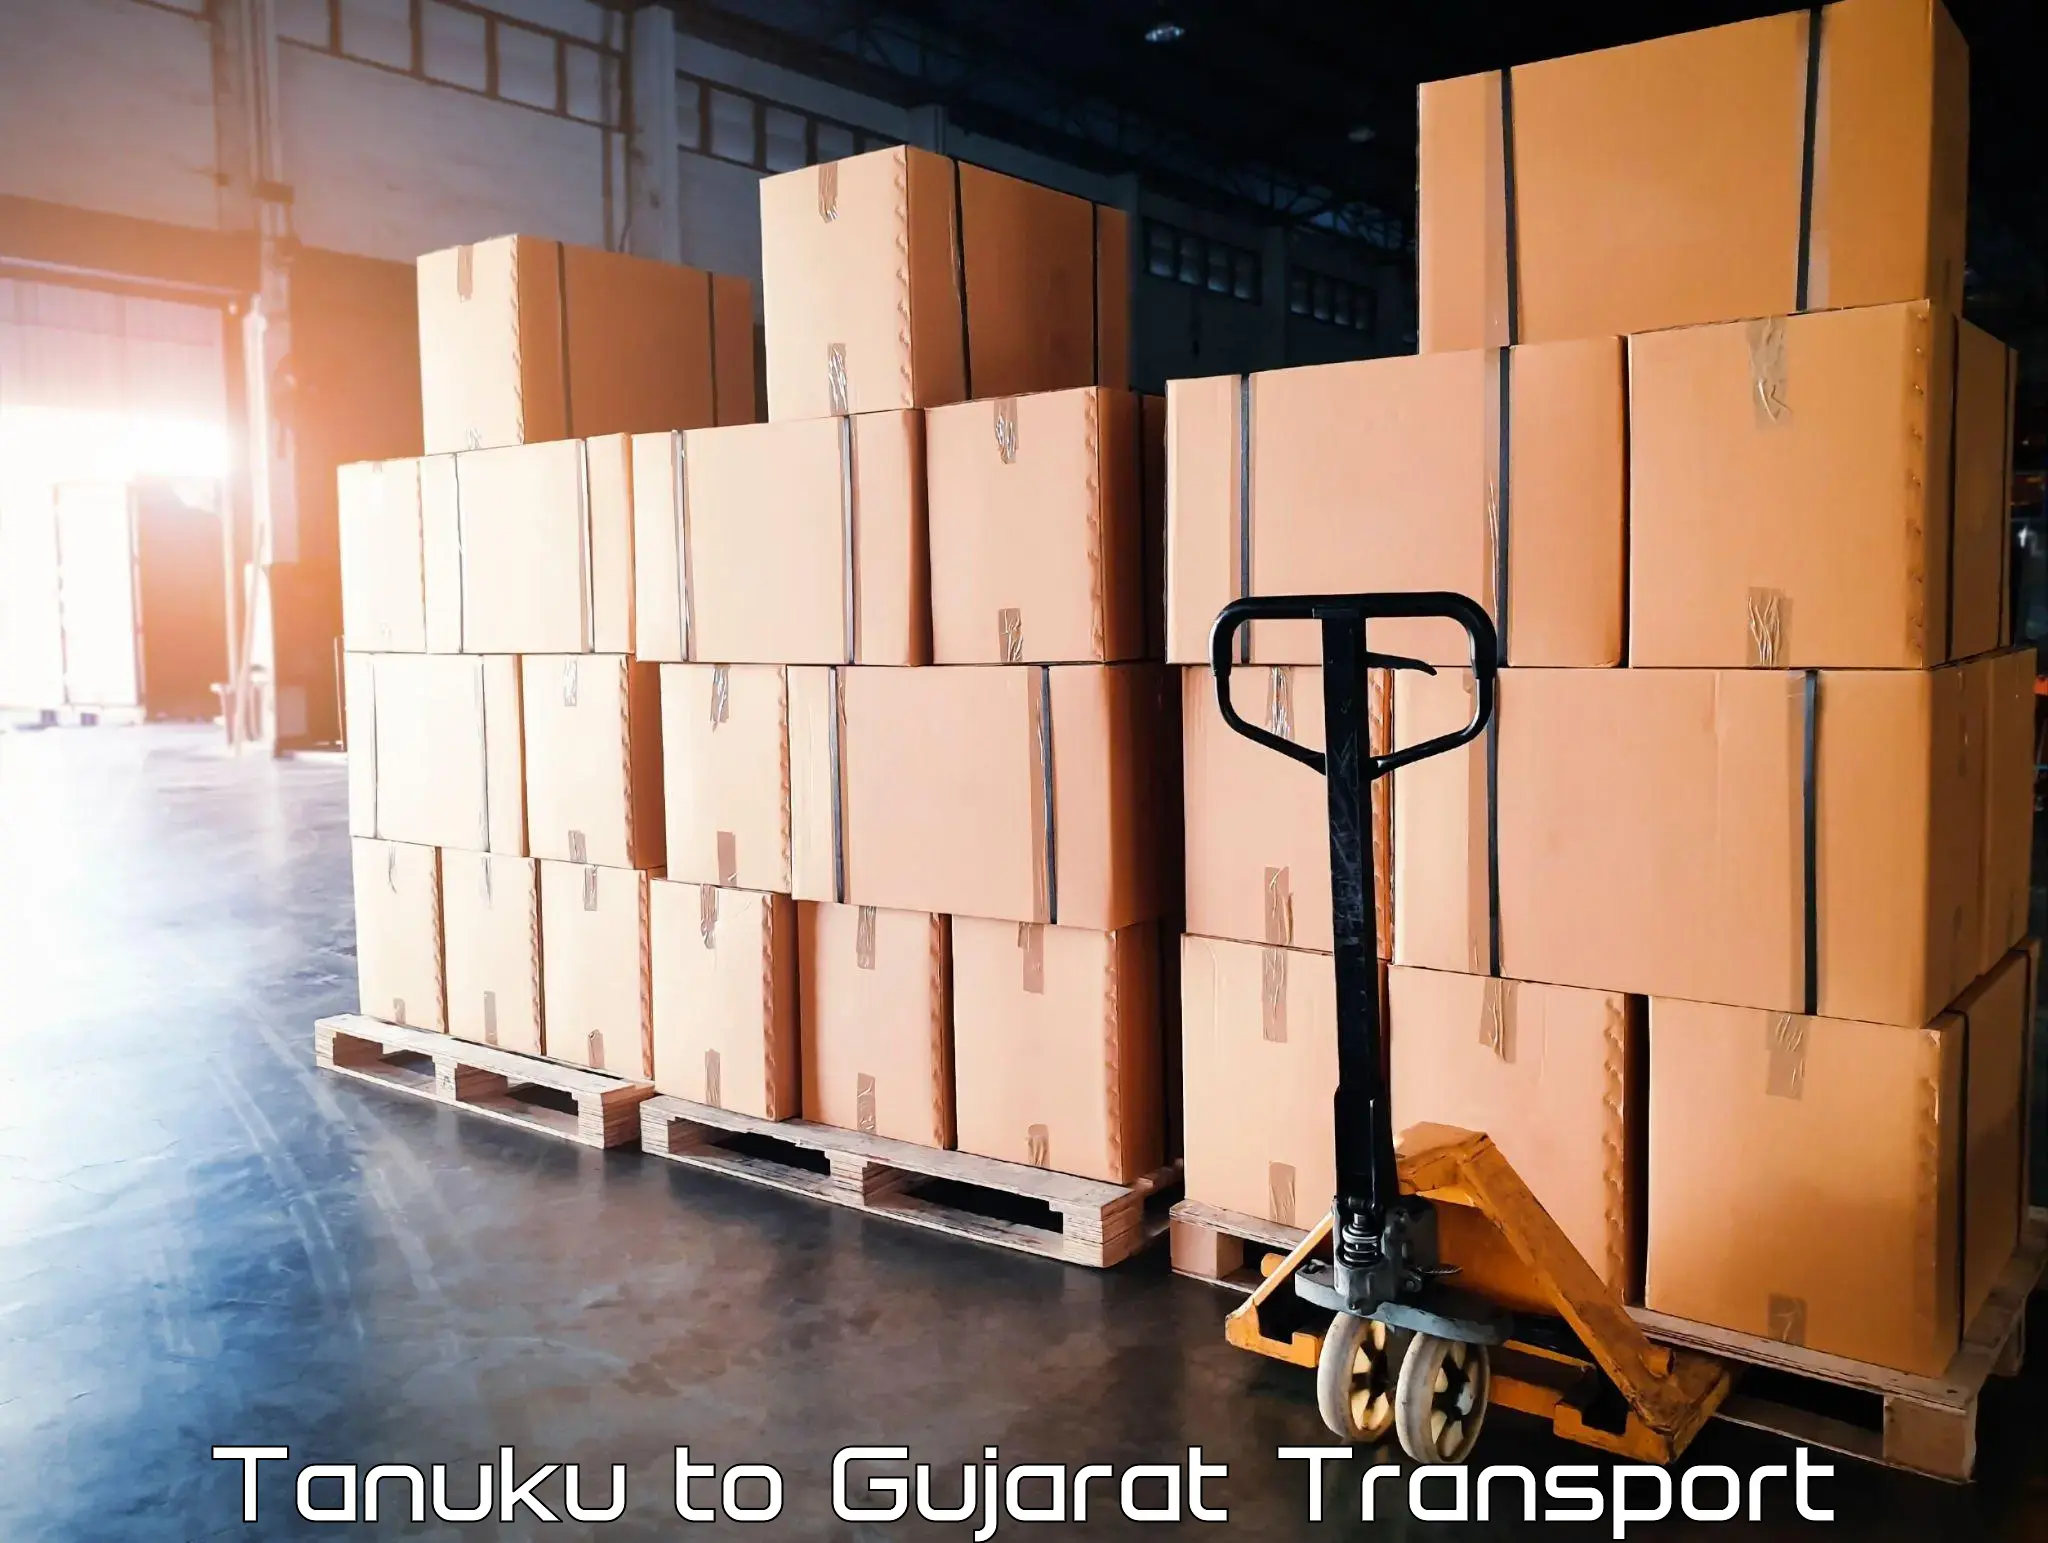 Transport bike from one state to another Tanuku to Gujarat